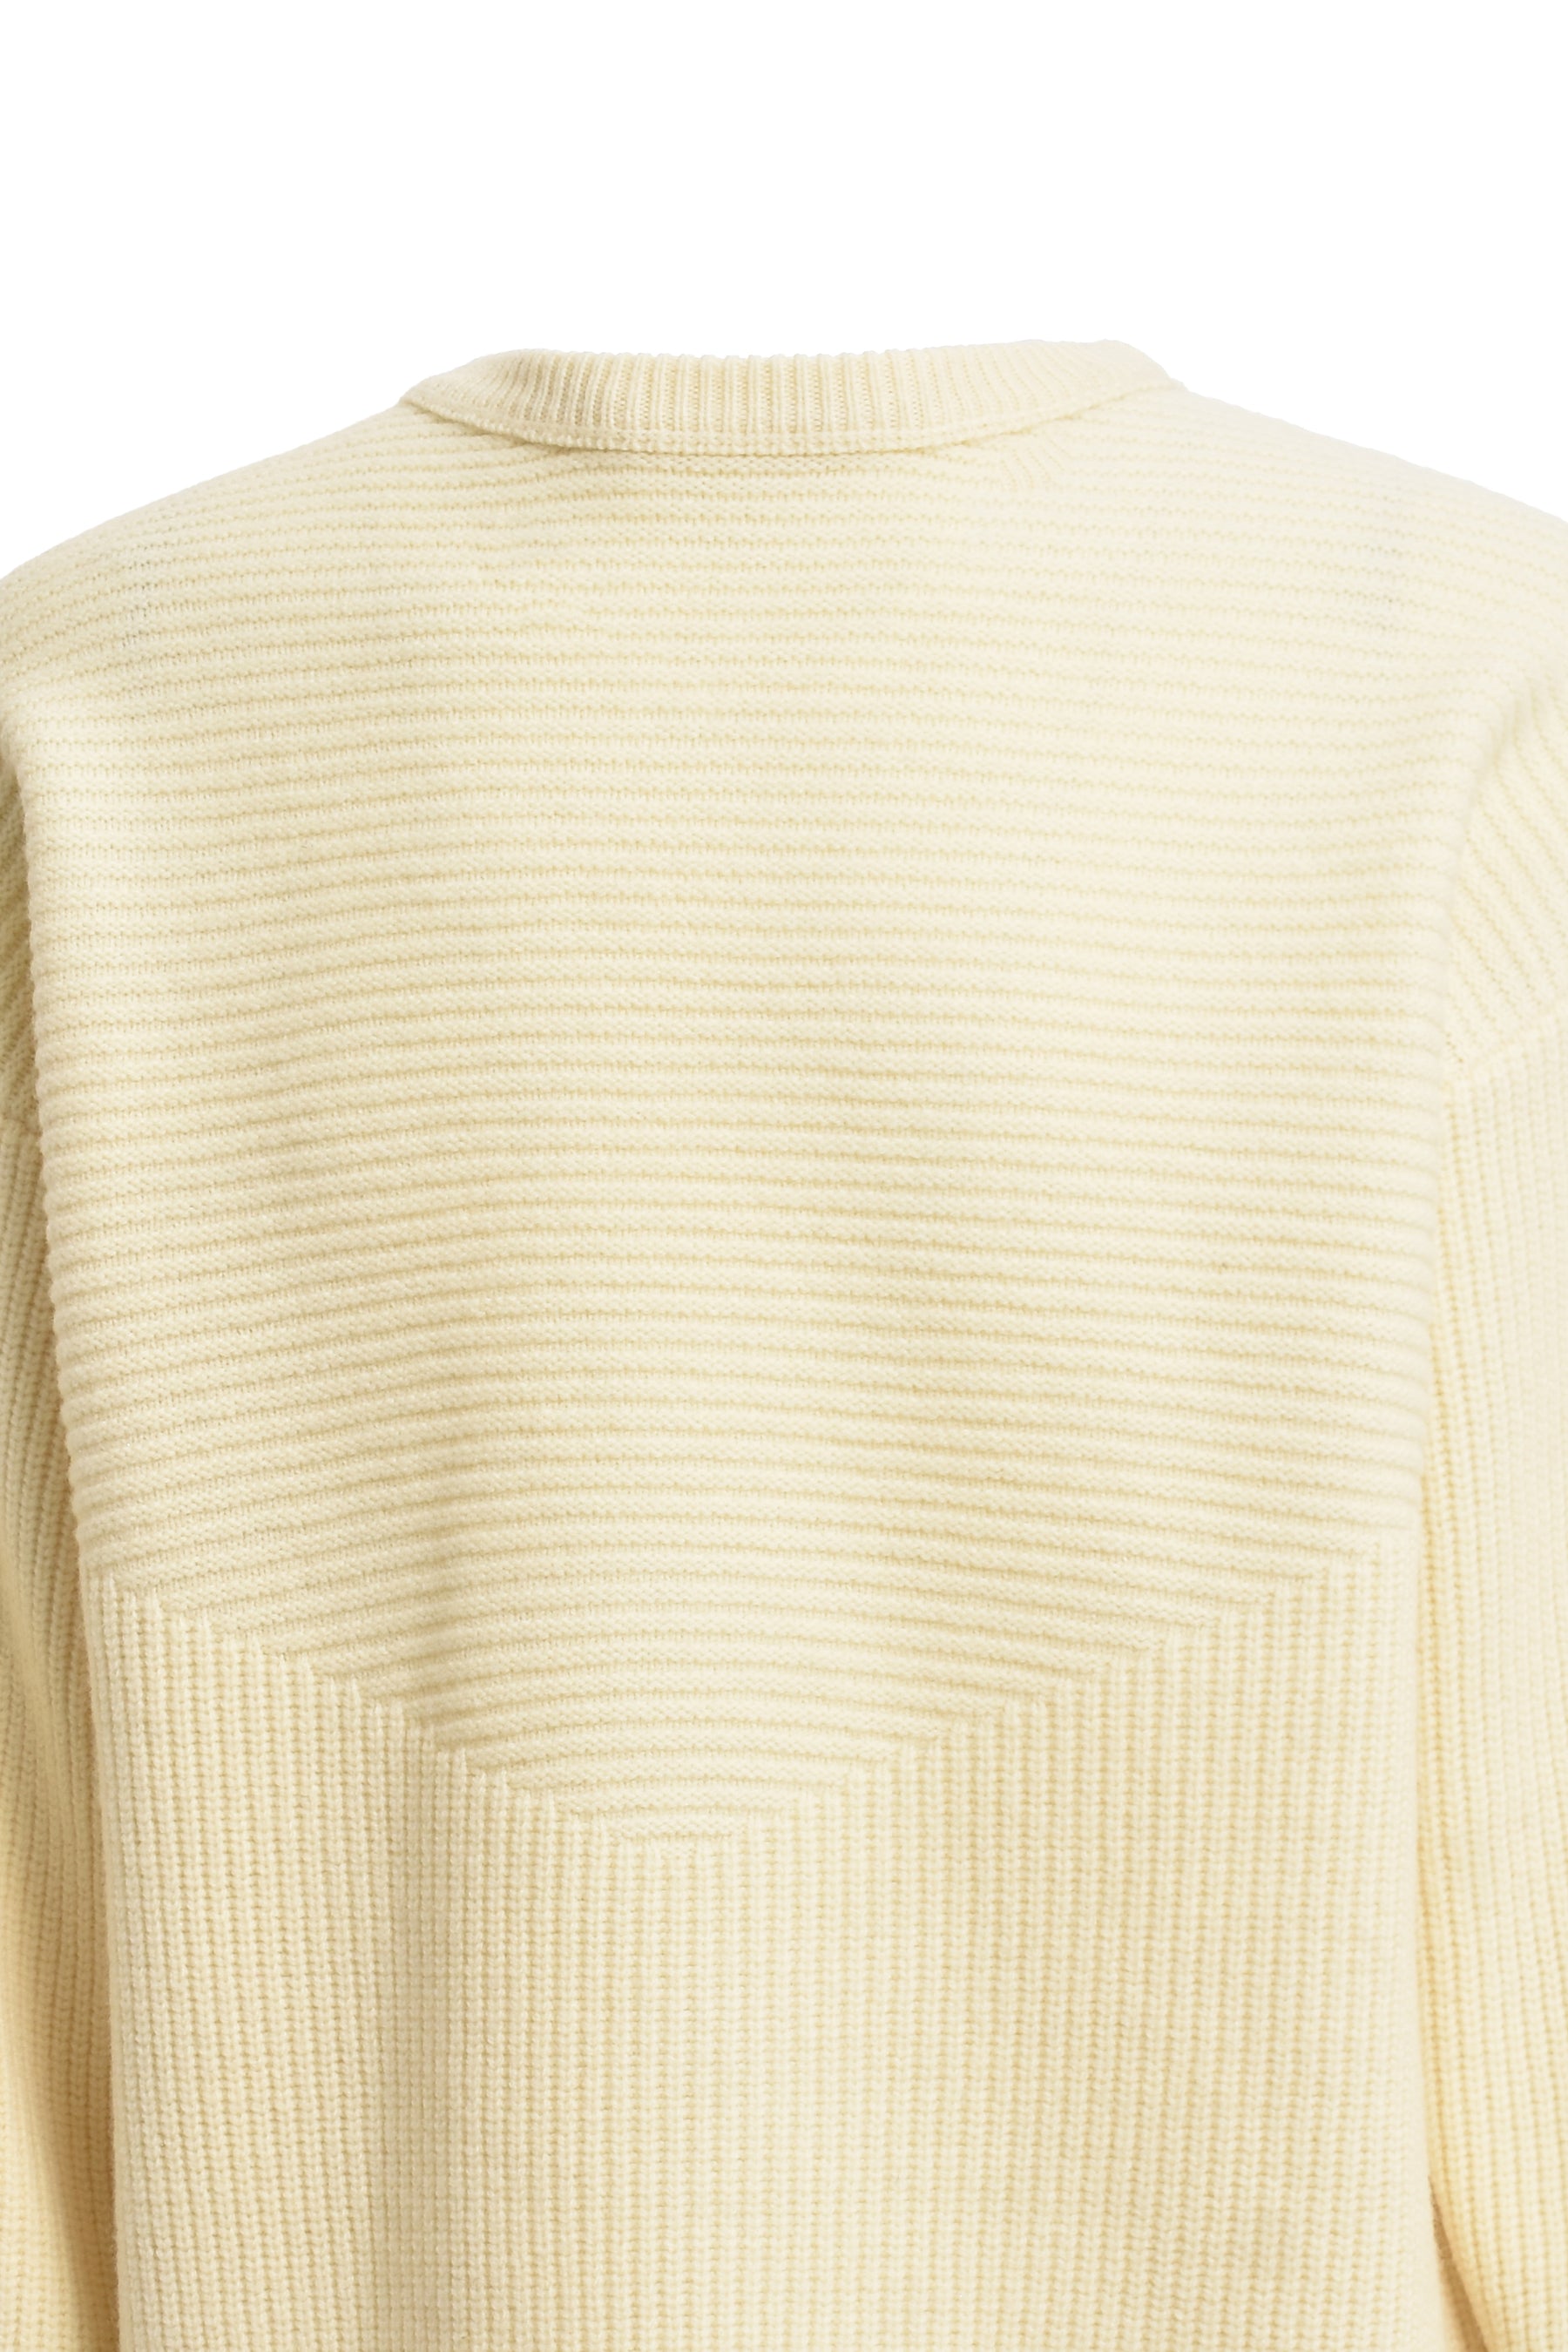 ROUTE KNIT SWEATER / O.WHT